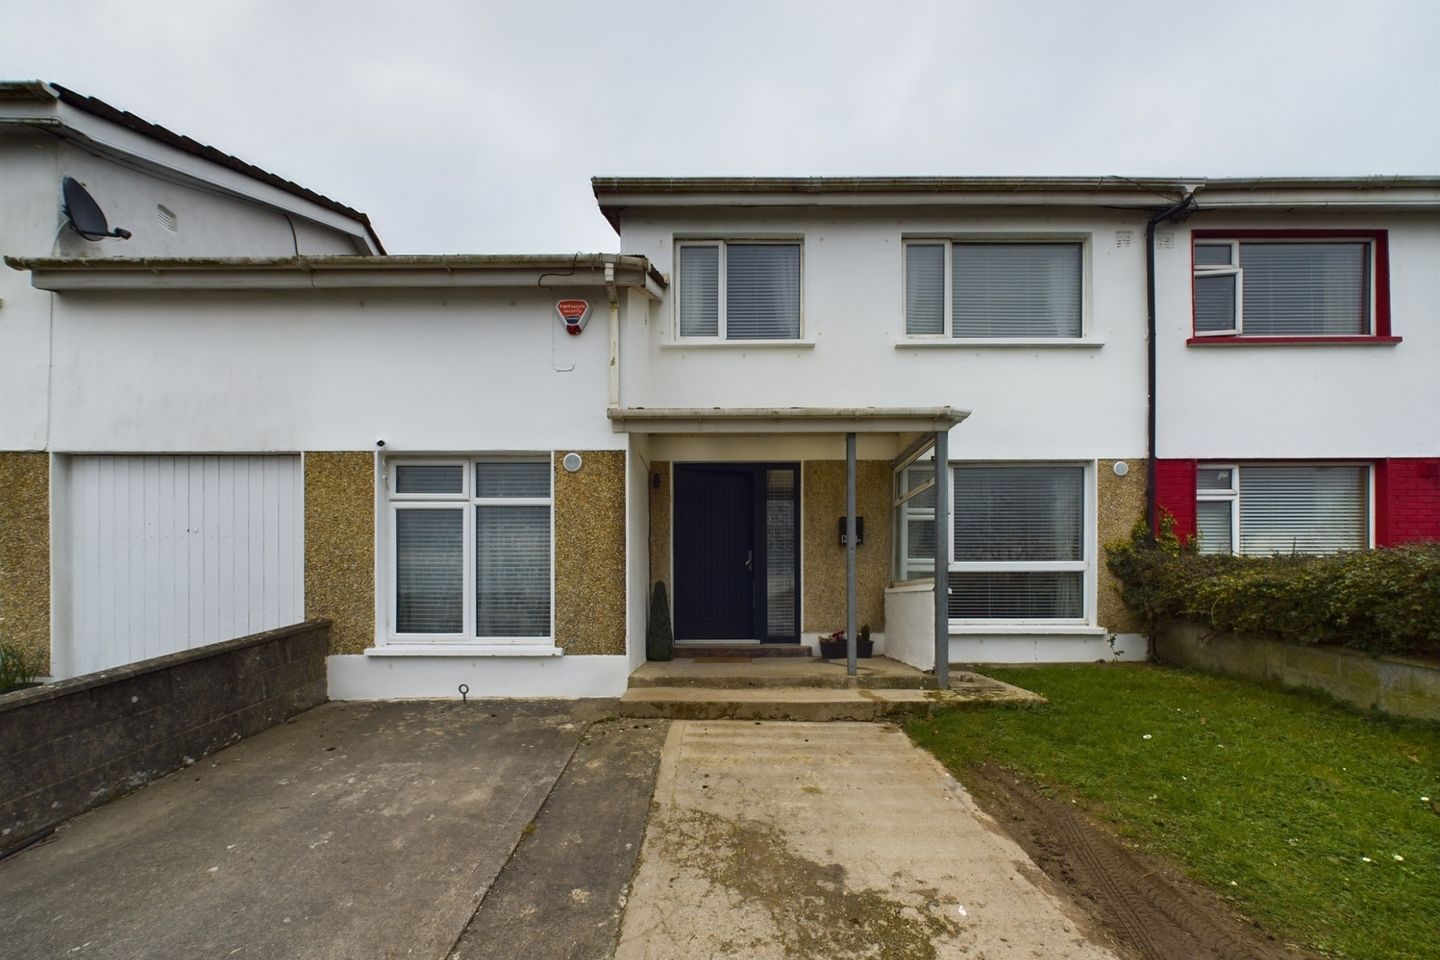 26 Crescent Drive, Hillview, Waterford, Waterford City, Co. Waterford, X91Y583